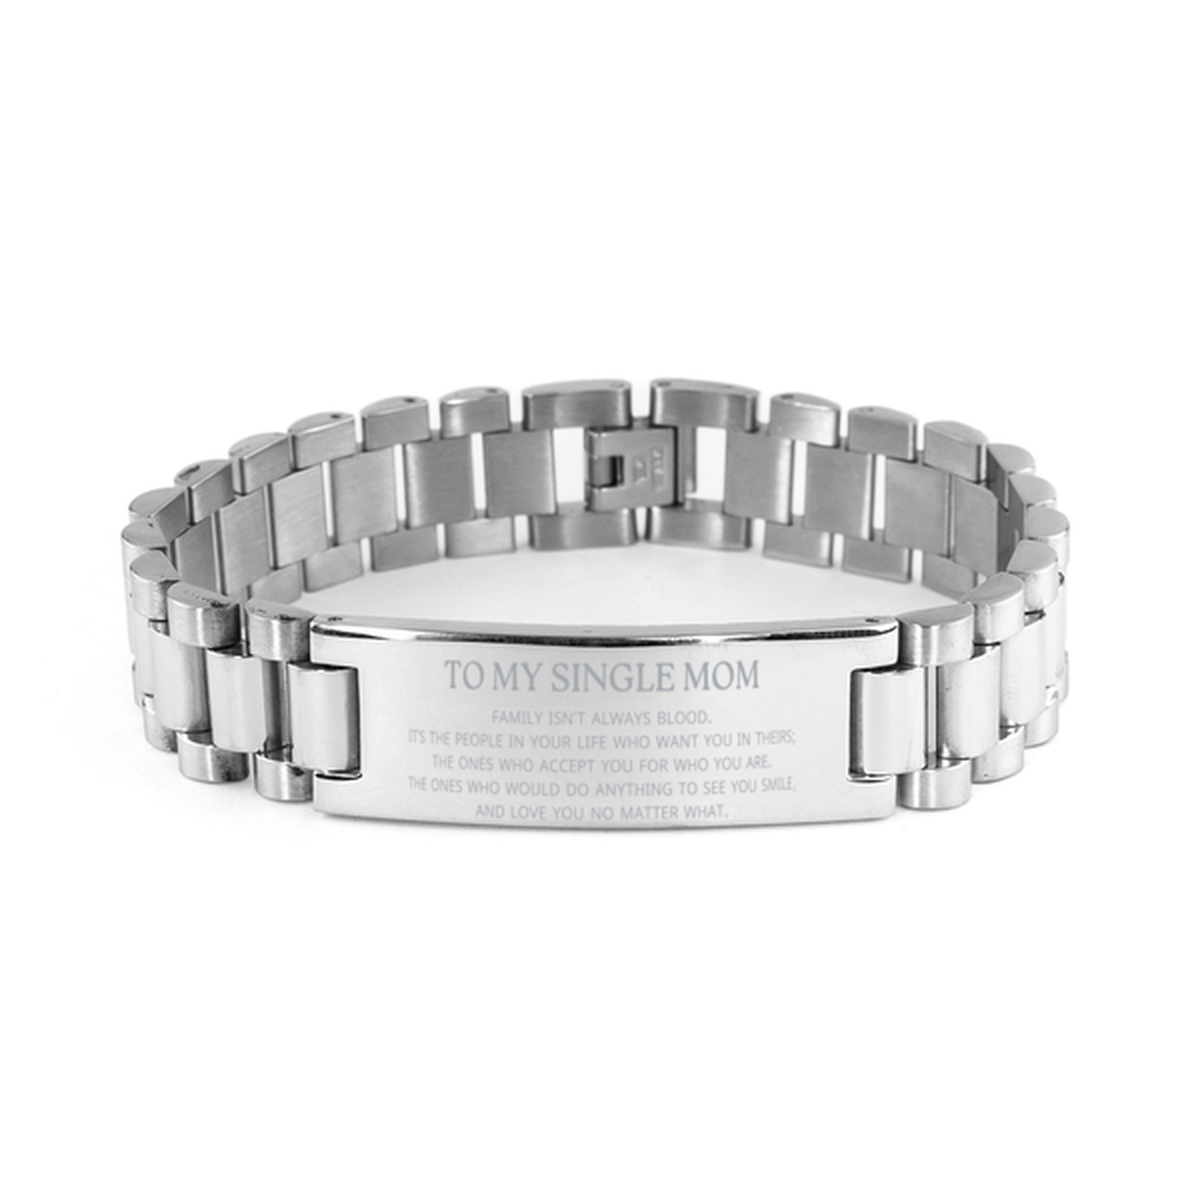 To My Single Mom Gifts, Family isn't always blood, Single Mom Ladder Stainless Steel Bracelet, Birthday Christmas Unique Present For Single Mom